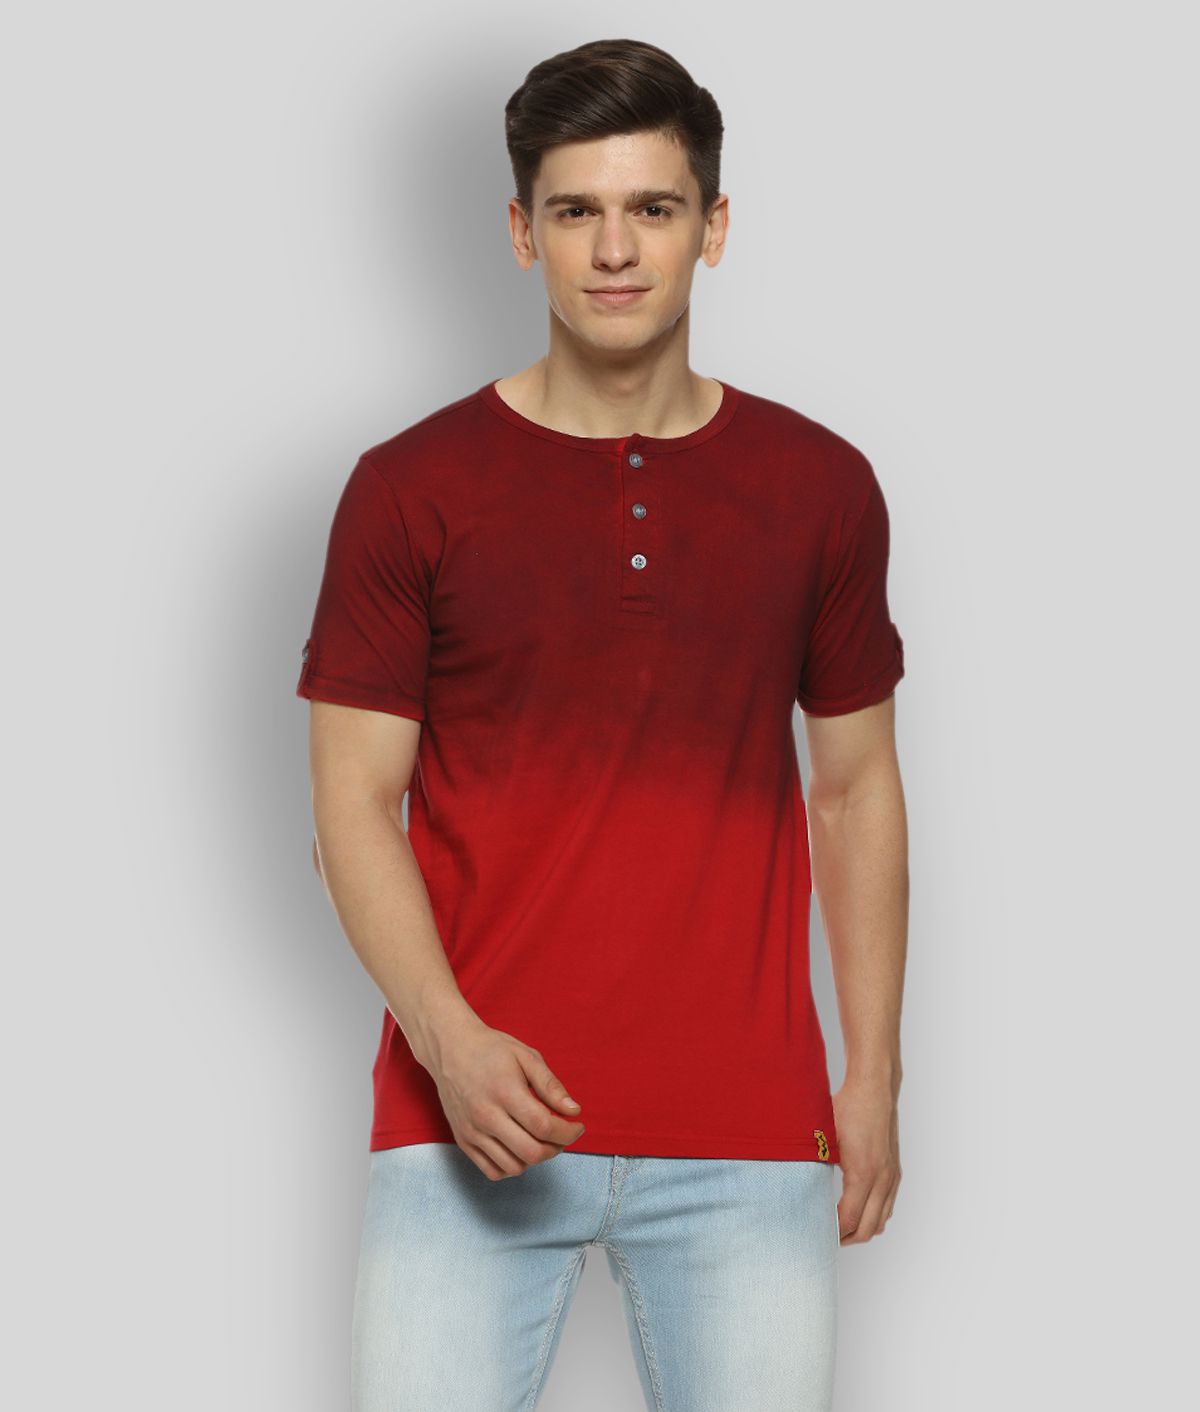     			Campus Sutra - Maroon Cotton Regular Fit Men's T-Shirt ( Pack of 1 )